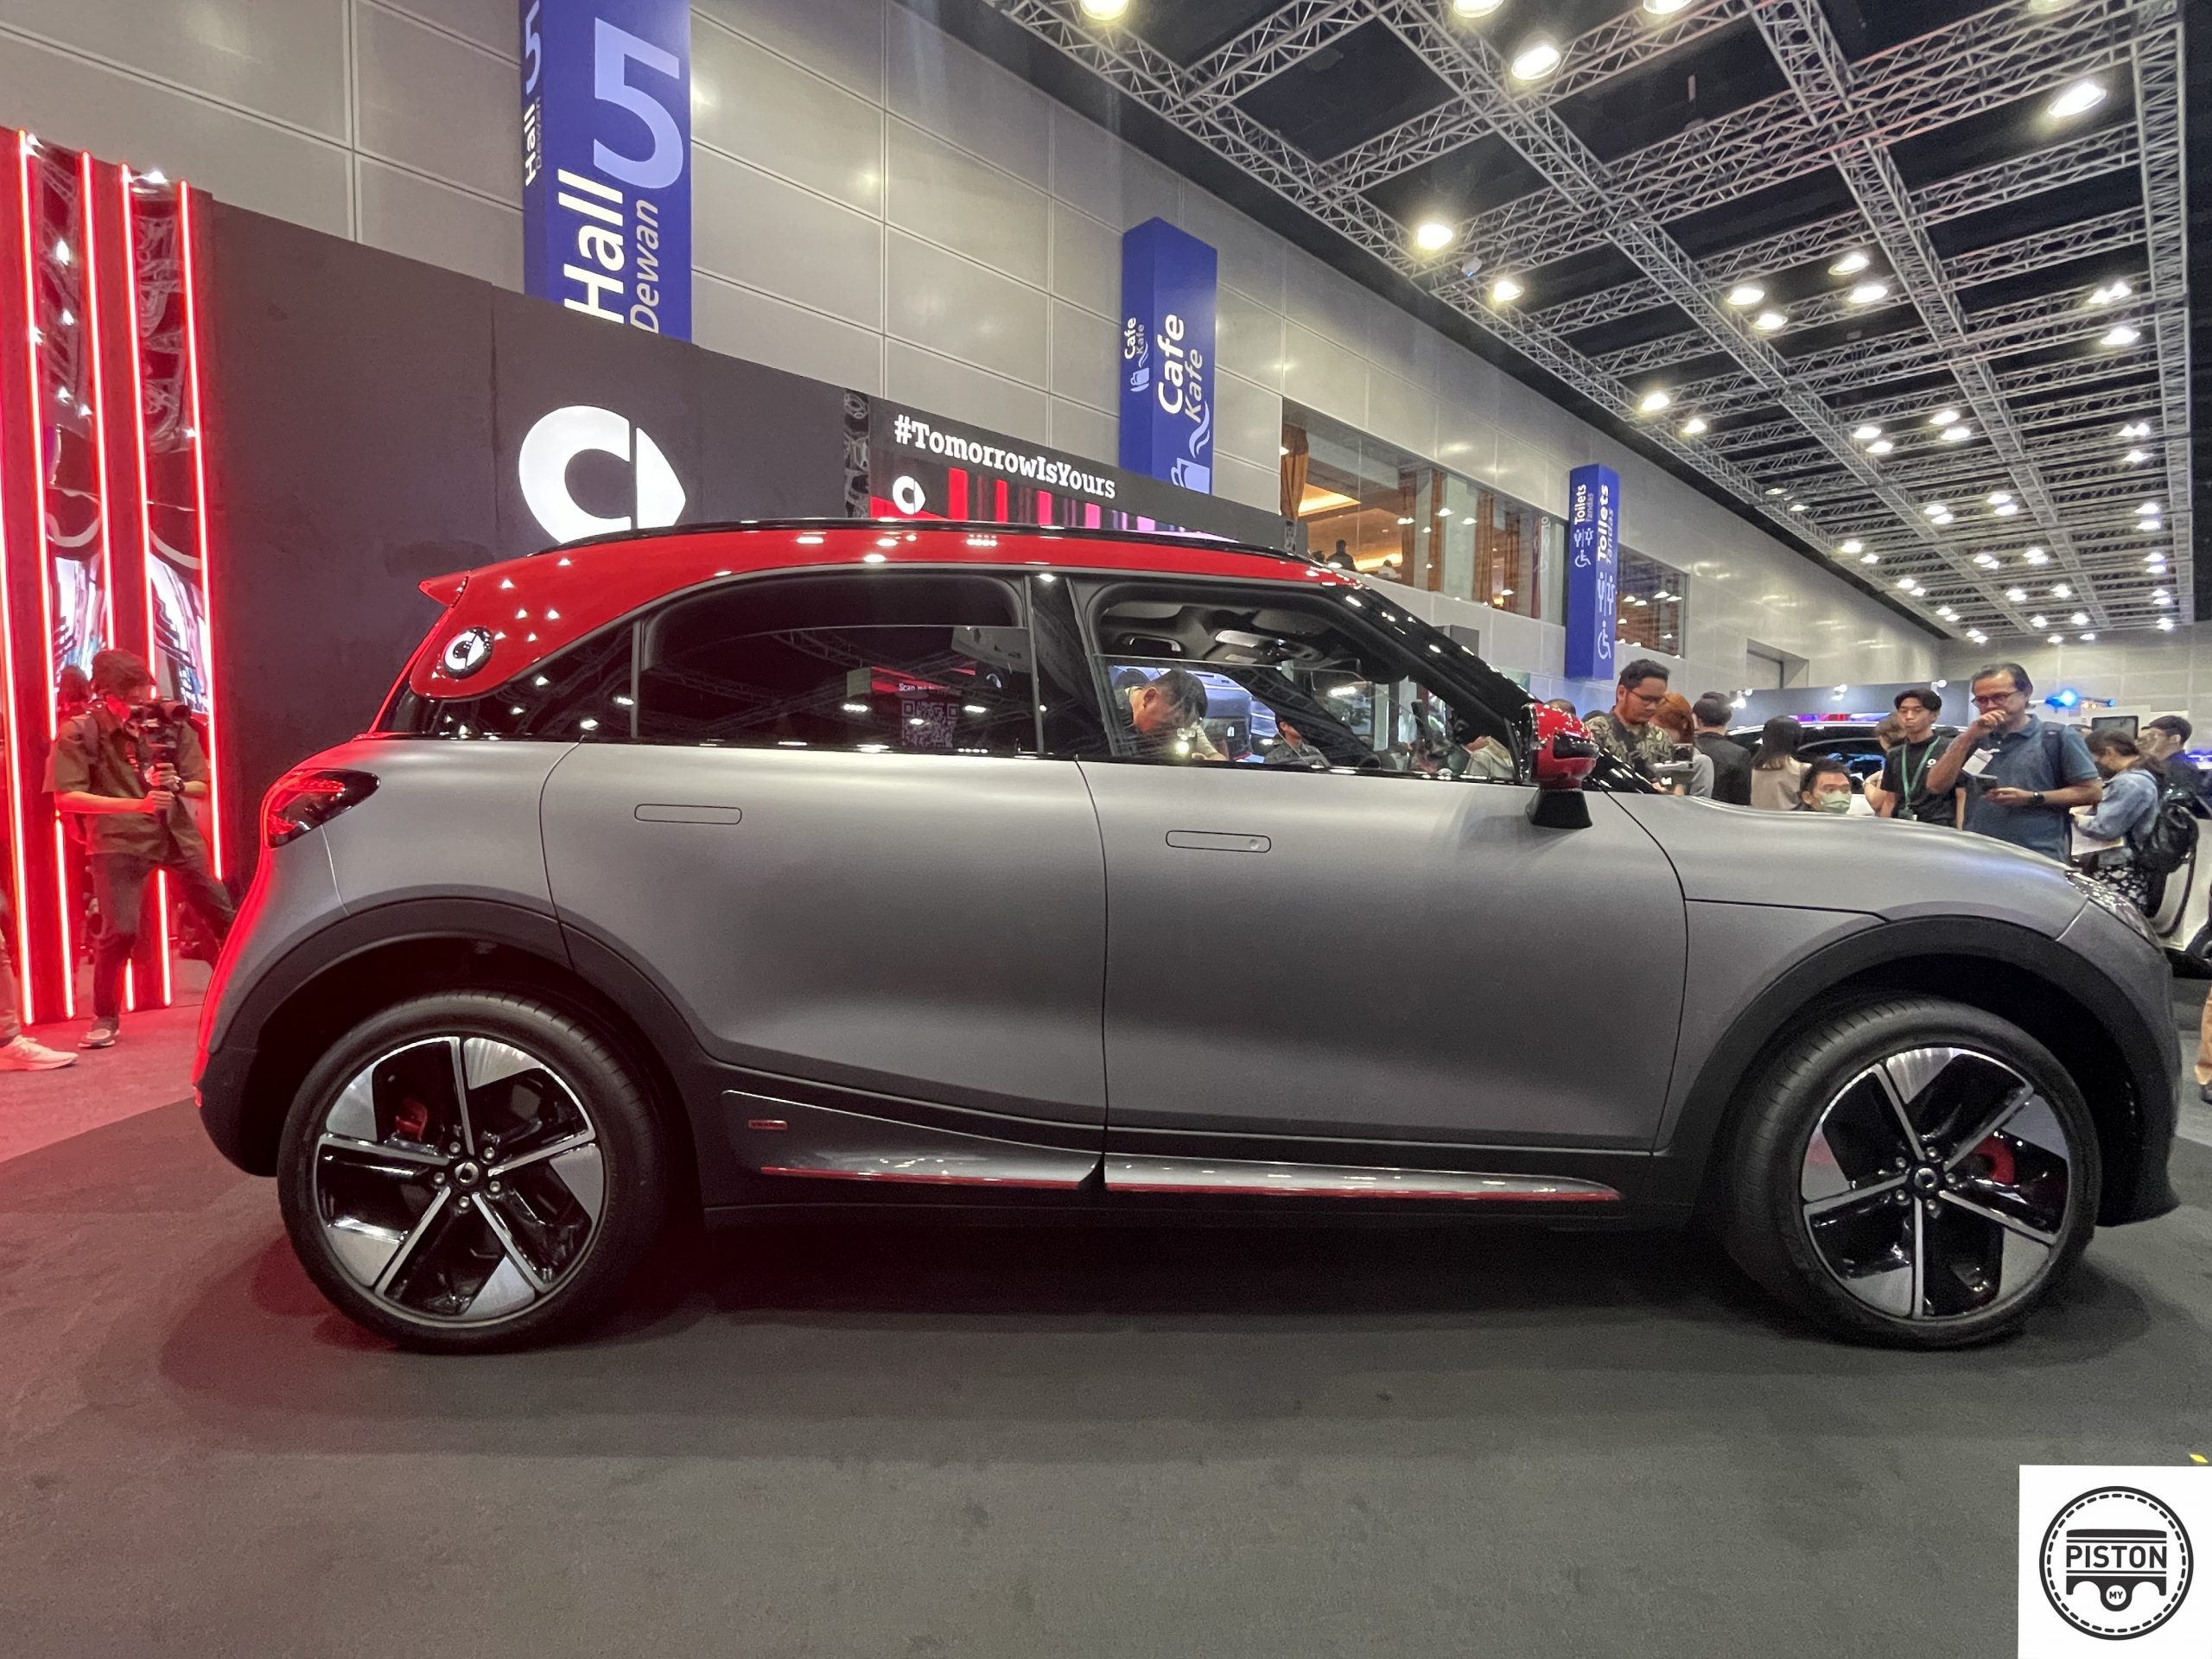 smart #1 brabus variant officially launched in malaysia